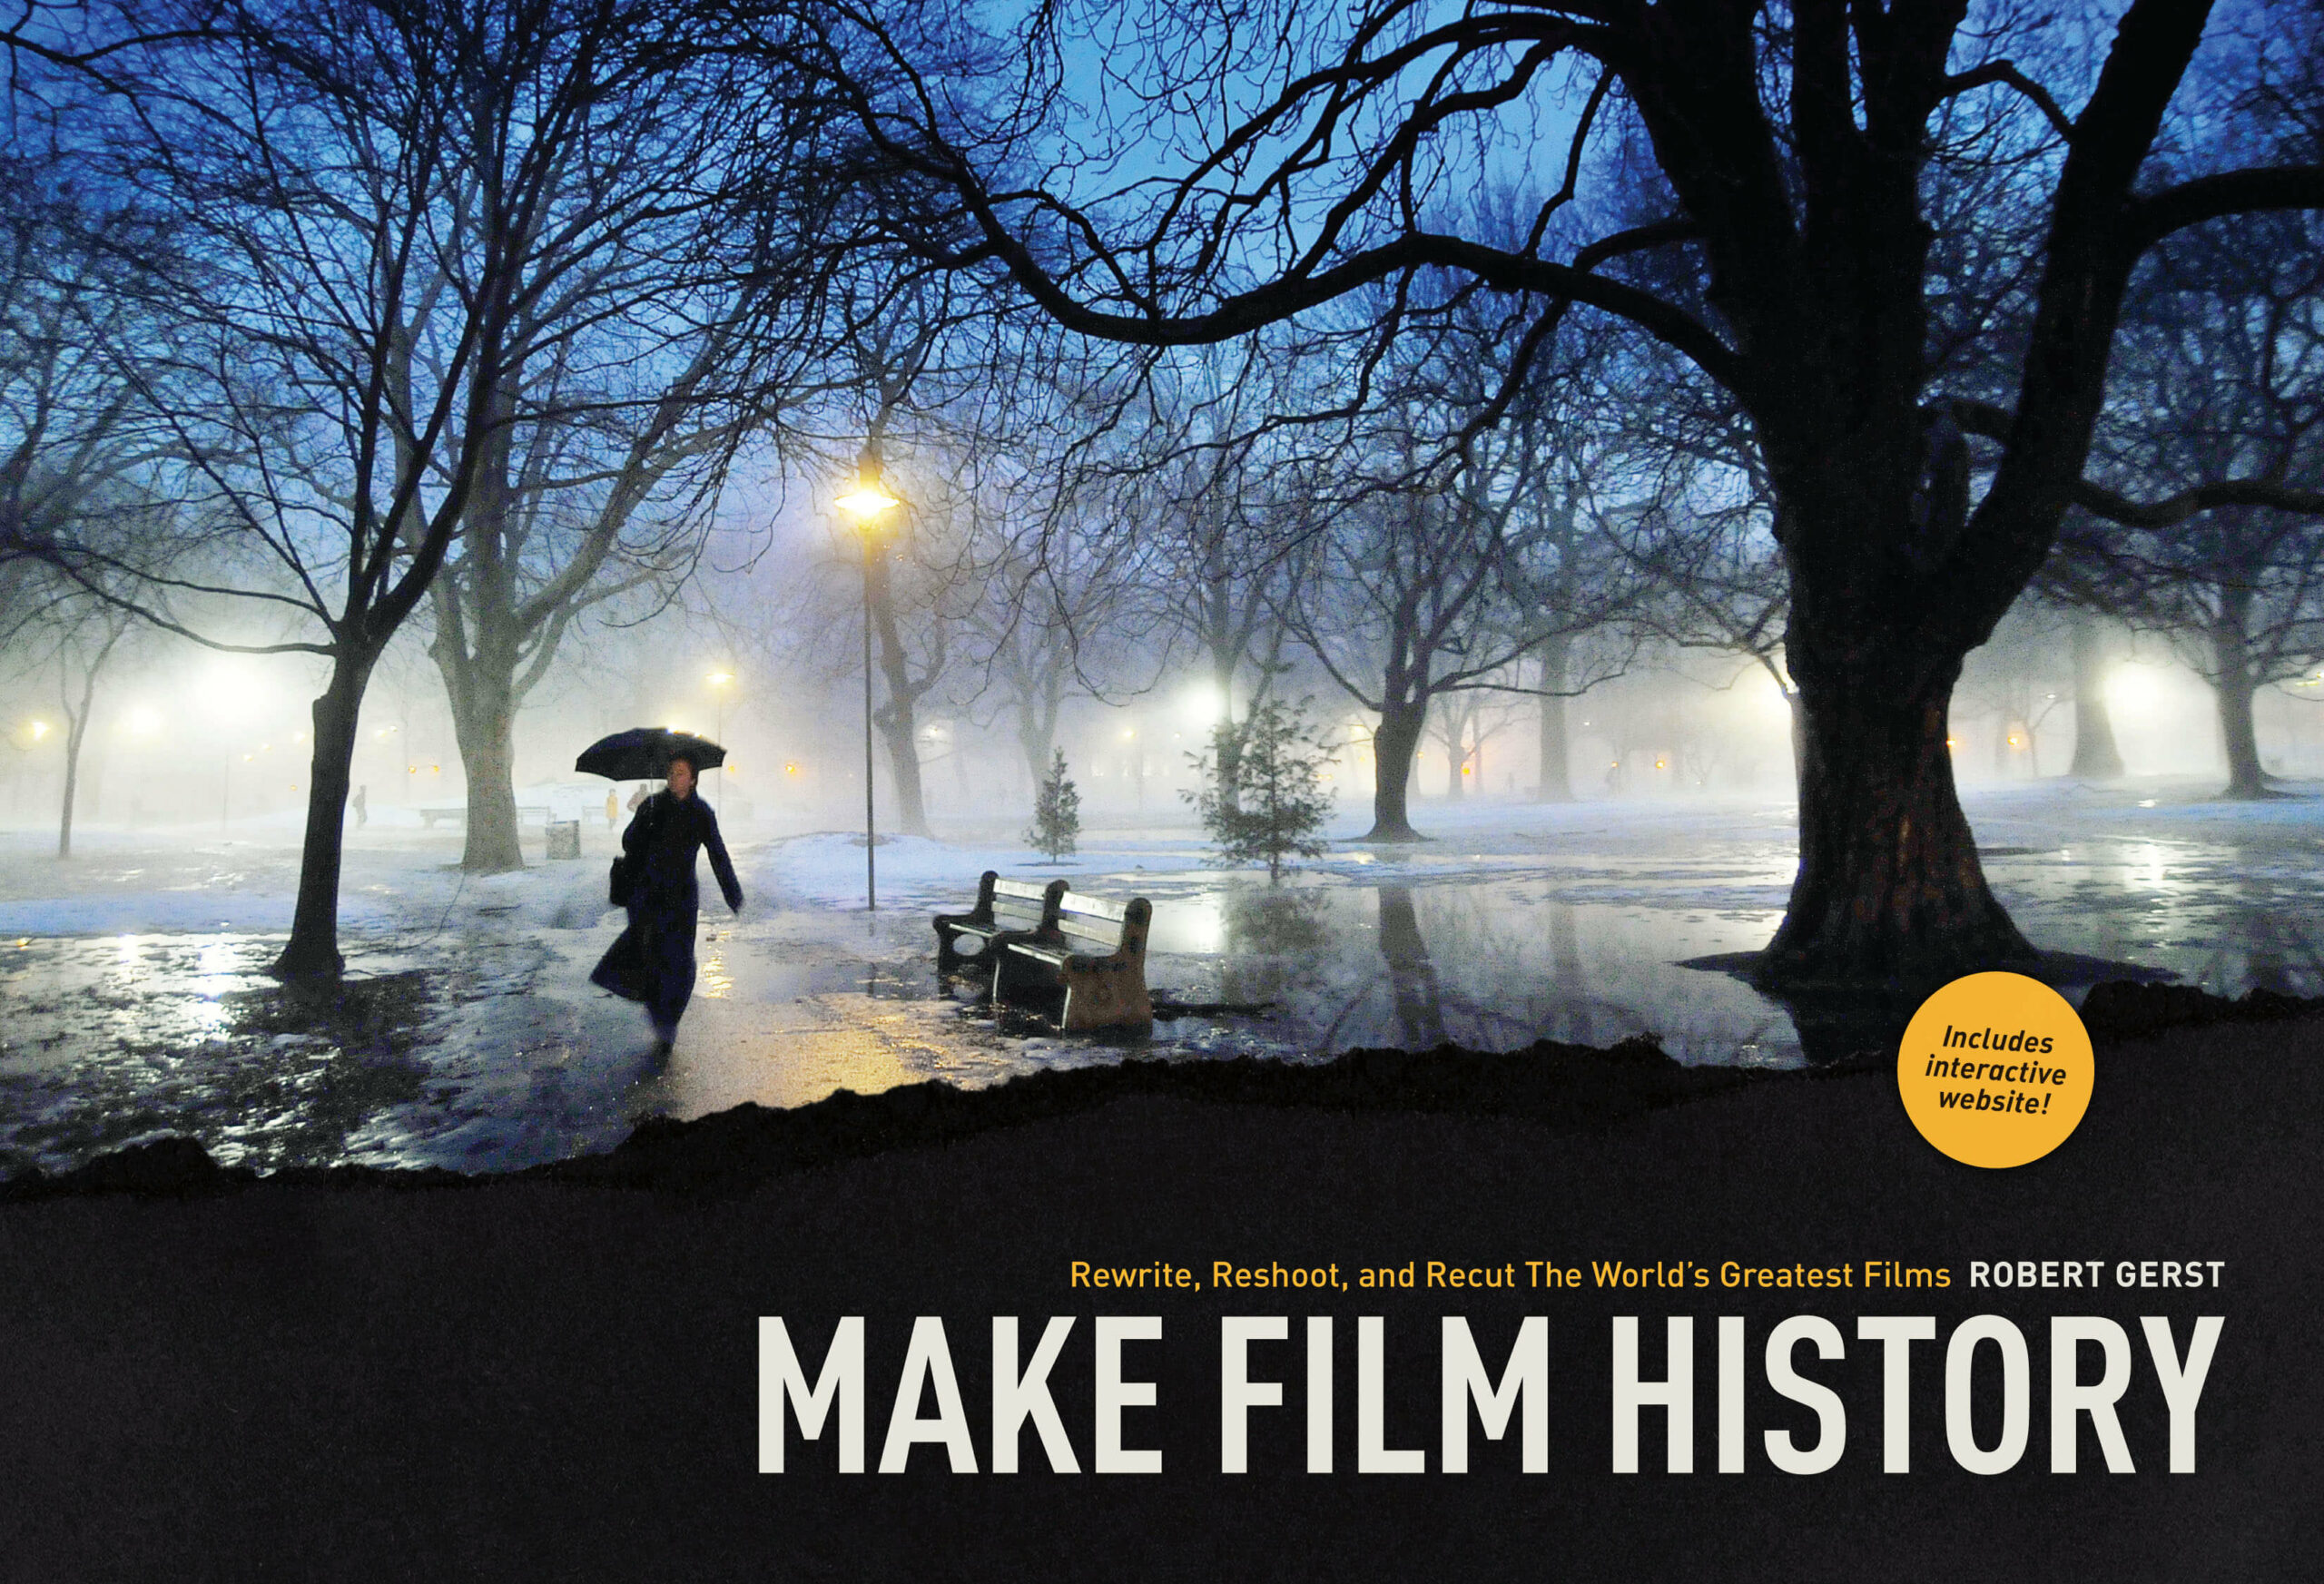 Make Film History: Rewrite, Reshoot, and Recut the World’s Greatest Films